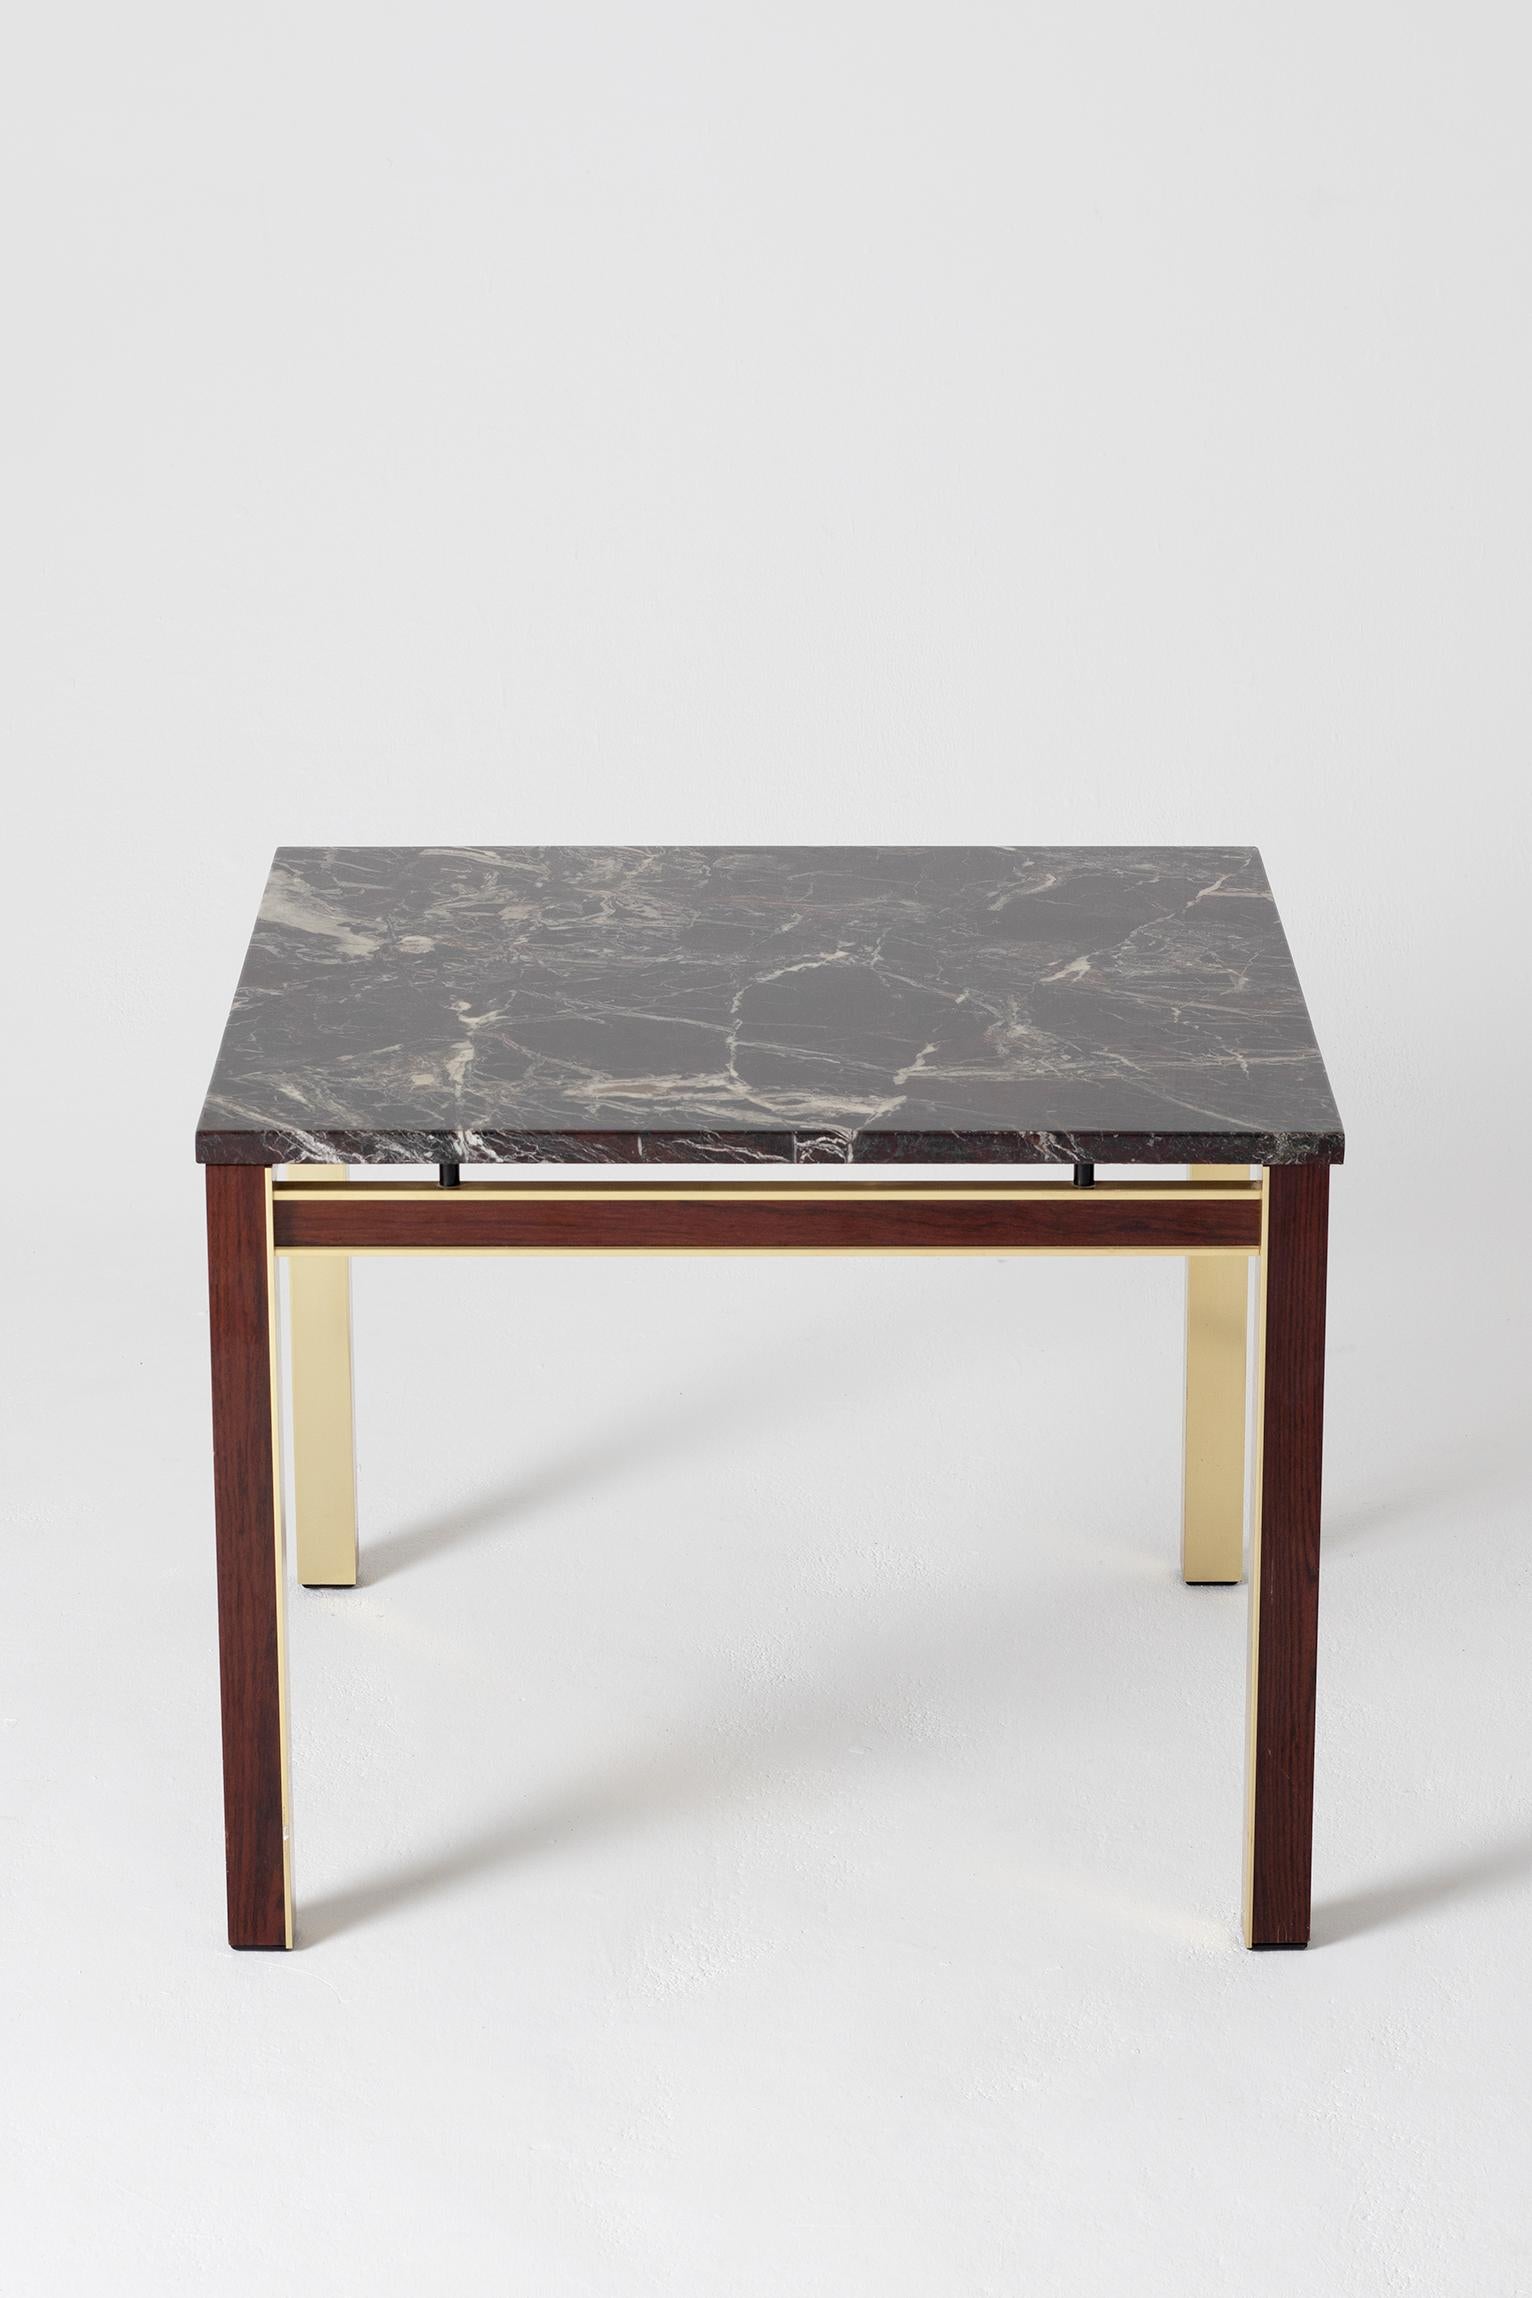 20th Century Midcentury Marble Topped Brass Square Side Table